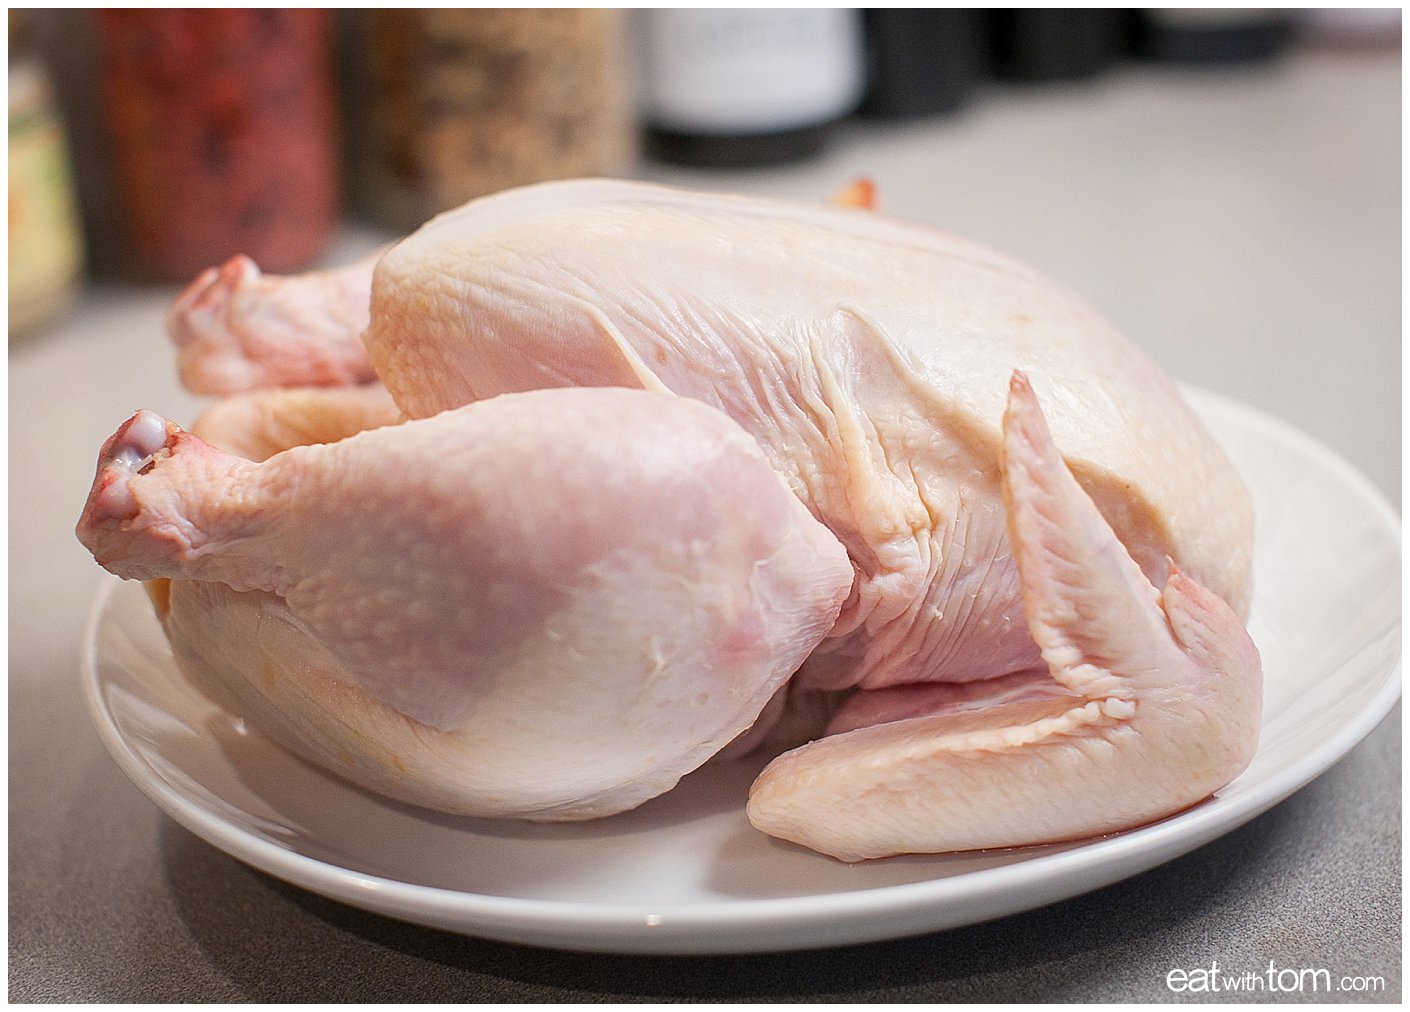 Prepare the raw chicken by wiping it dry